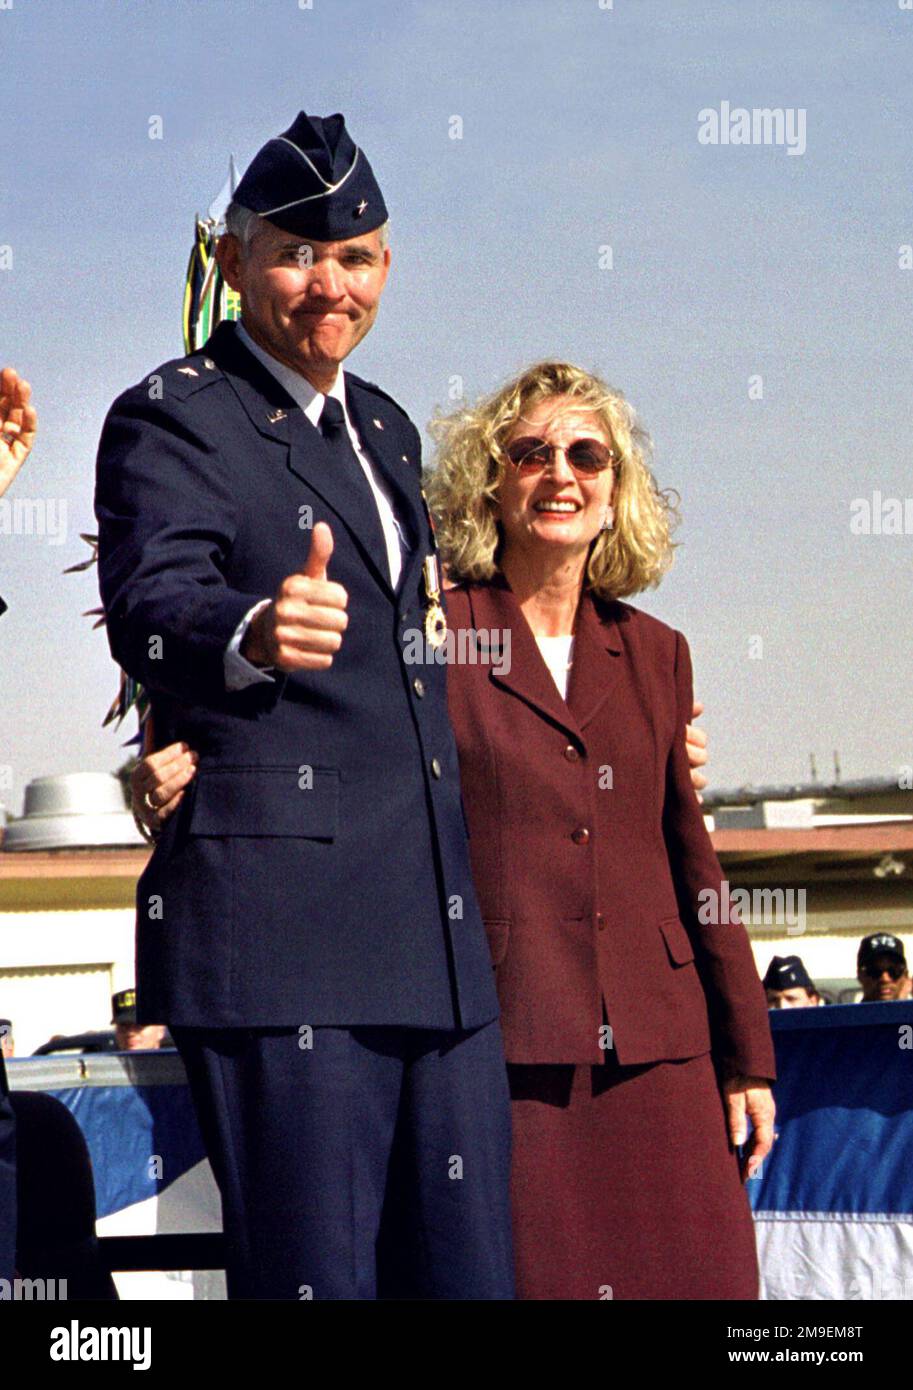 Former 60th Air Mobility Wing Commander at Travis Air Force Base, California, Brigadier General Steven A. Roser, retires from the United States Air Force after 29 years of dedicated service. With his wife, Linda, at his side he gives a thumbs up to Travis Team co-workers, friends and civic leaders. Base: Travis Air Force Base State: California (CA) Country: United States Of America (USA) Stock Photo